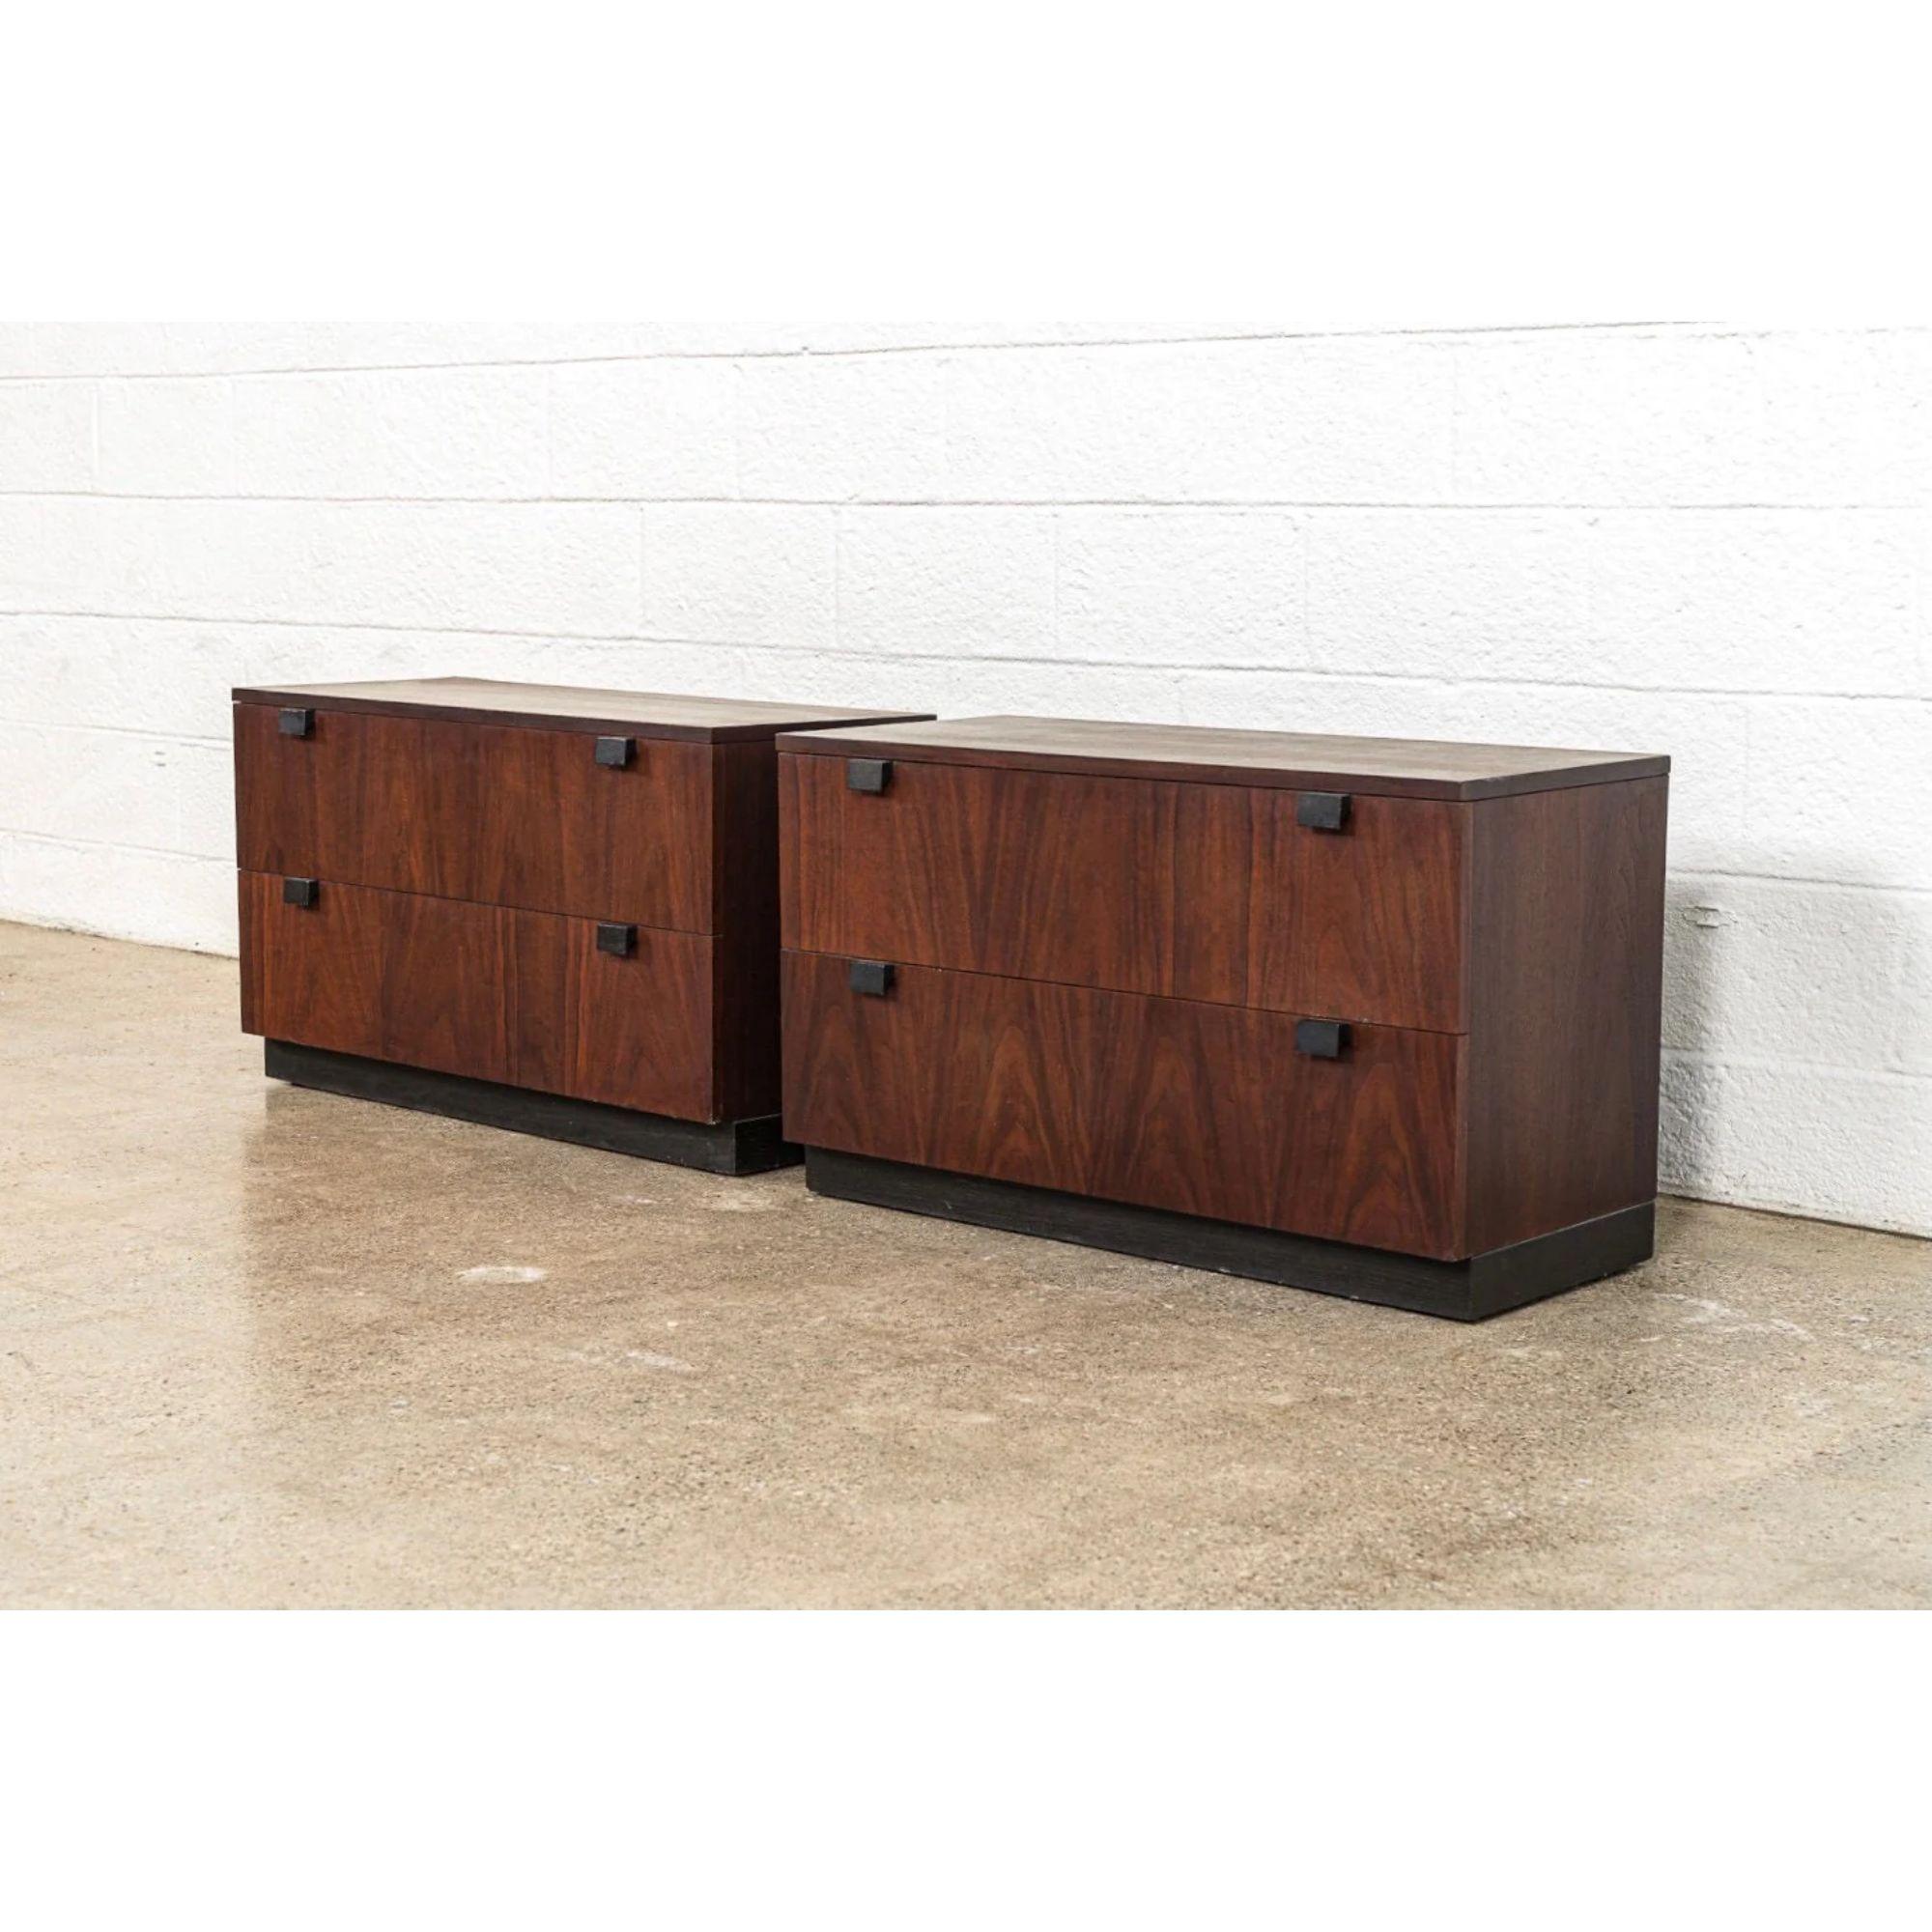 Vintage Mid Century Milo Baughman for Directional Wooden Nightstands

This pair of vintage Mid-Century Modern Milo Baughman for Directional nightstands are circa 1960. They feature gorgeous natural walnut wood grain, wide roomy drawers and black